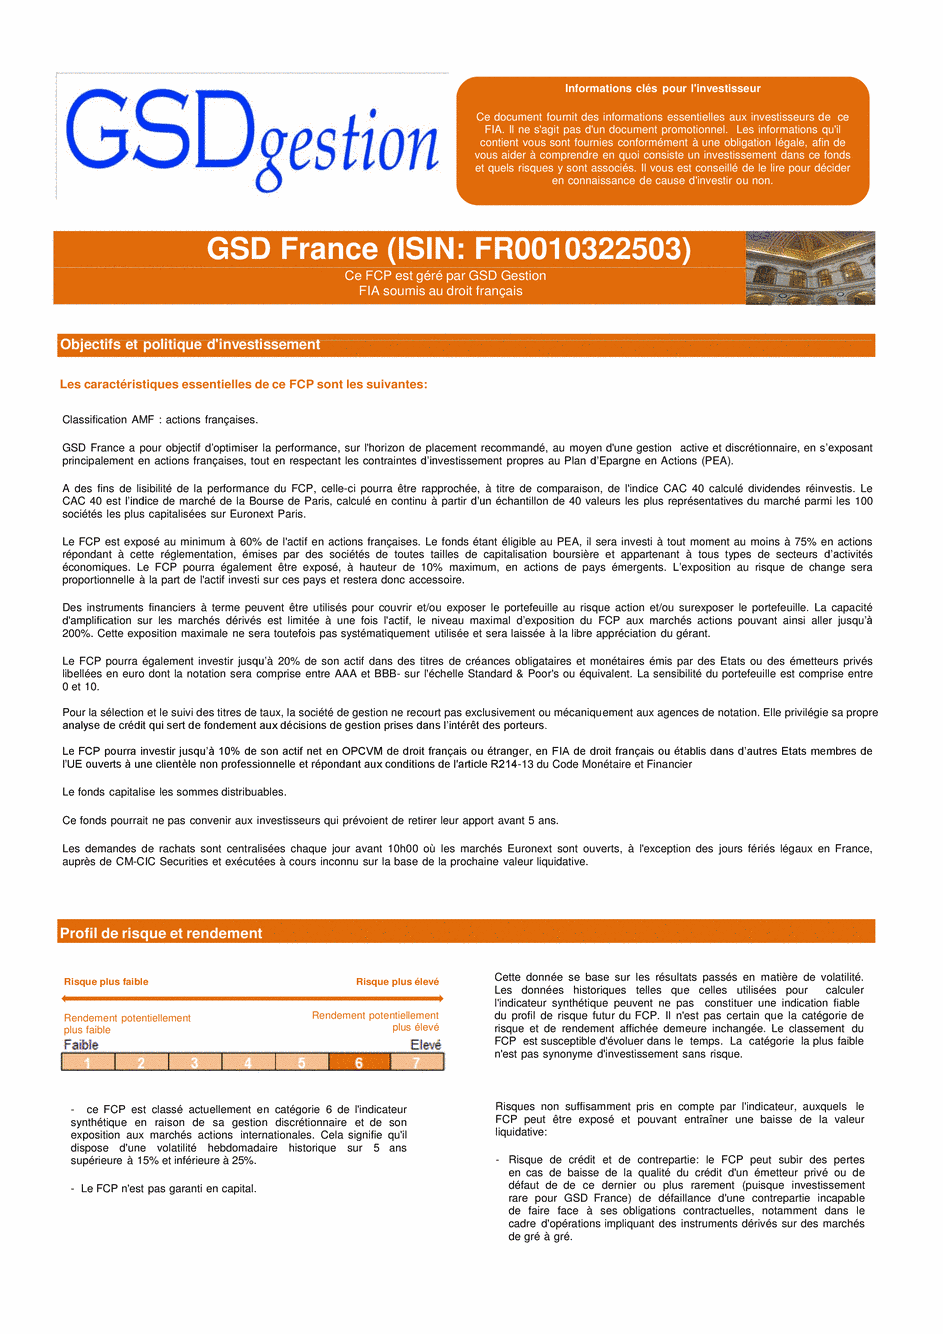 DICI-Prospectus Complet GSD France - 10/03/2015 - French